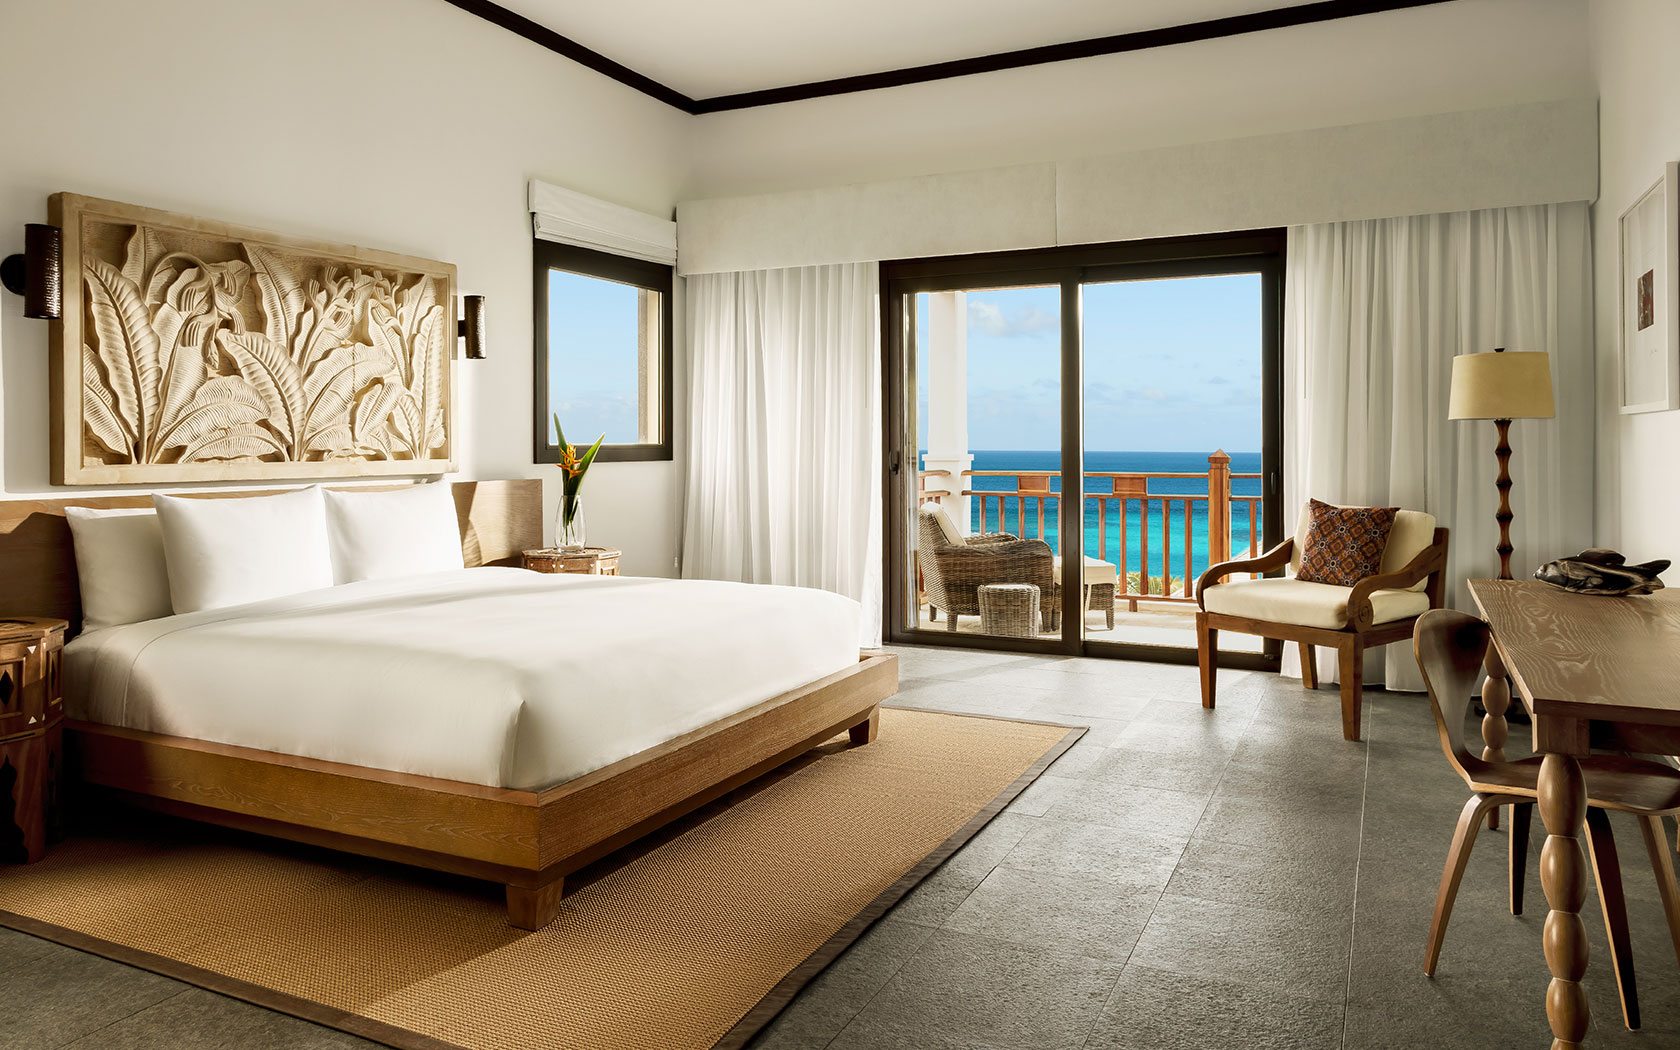 King bed, side table, view of balcony to ocean